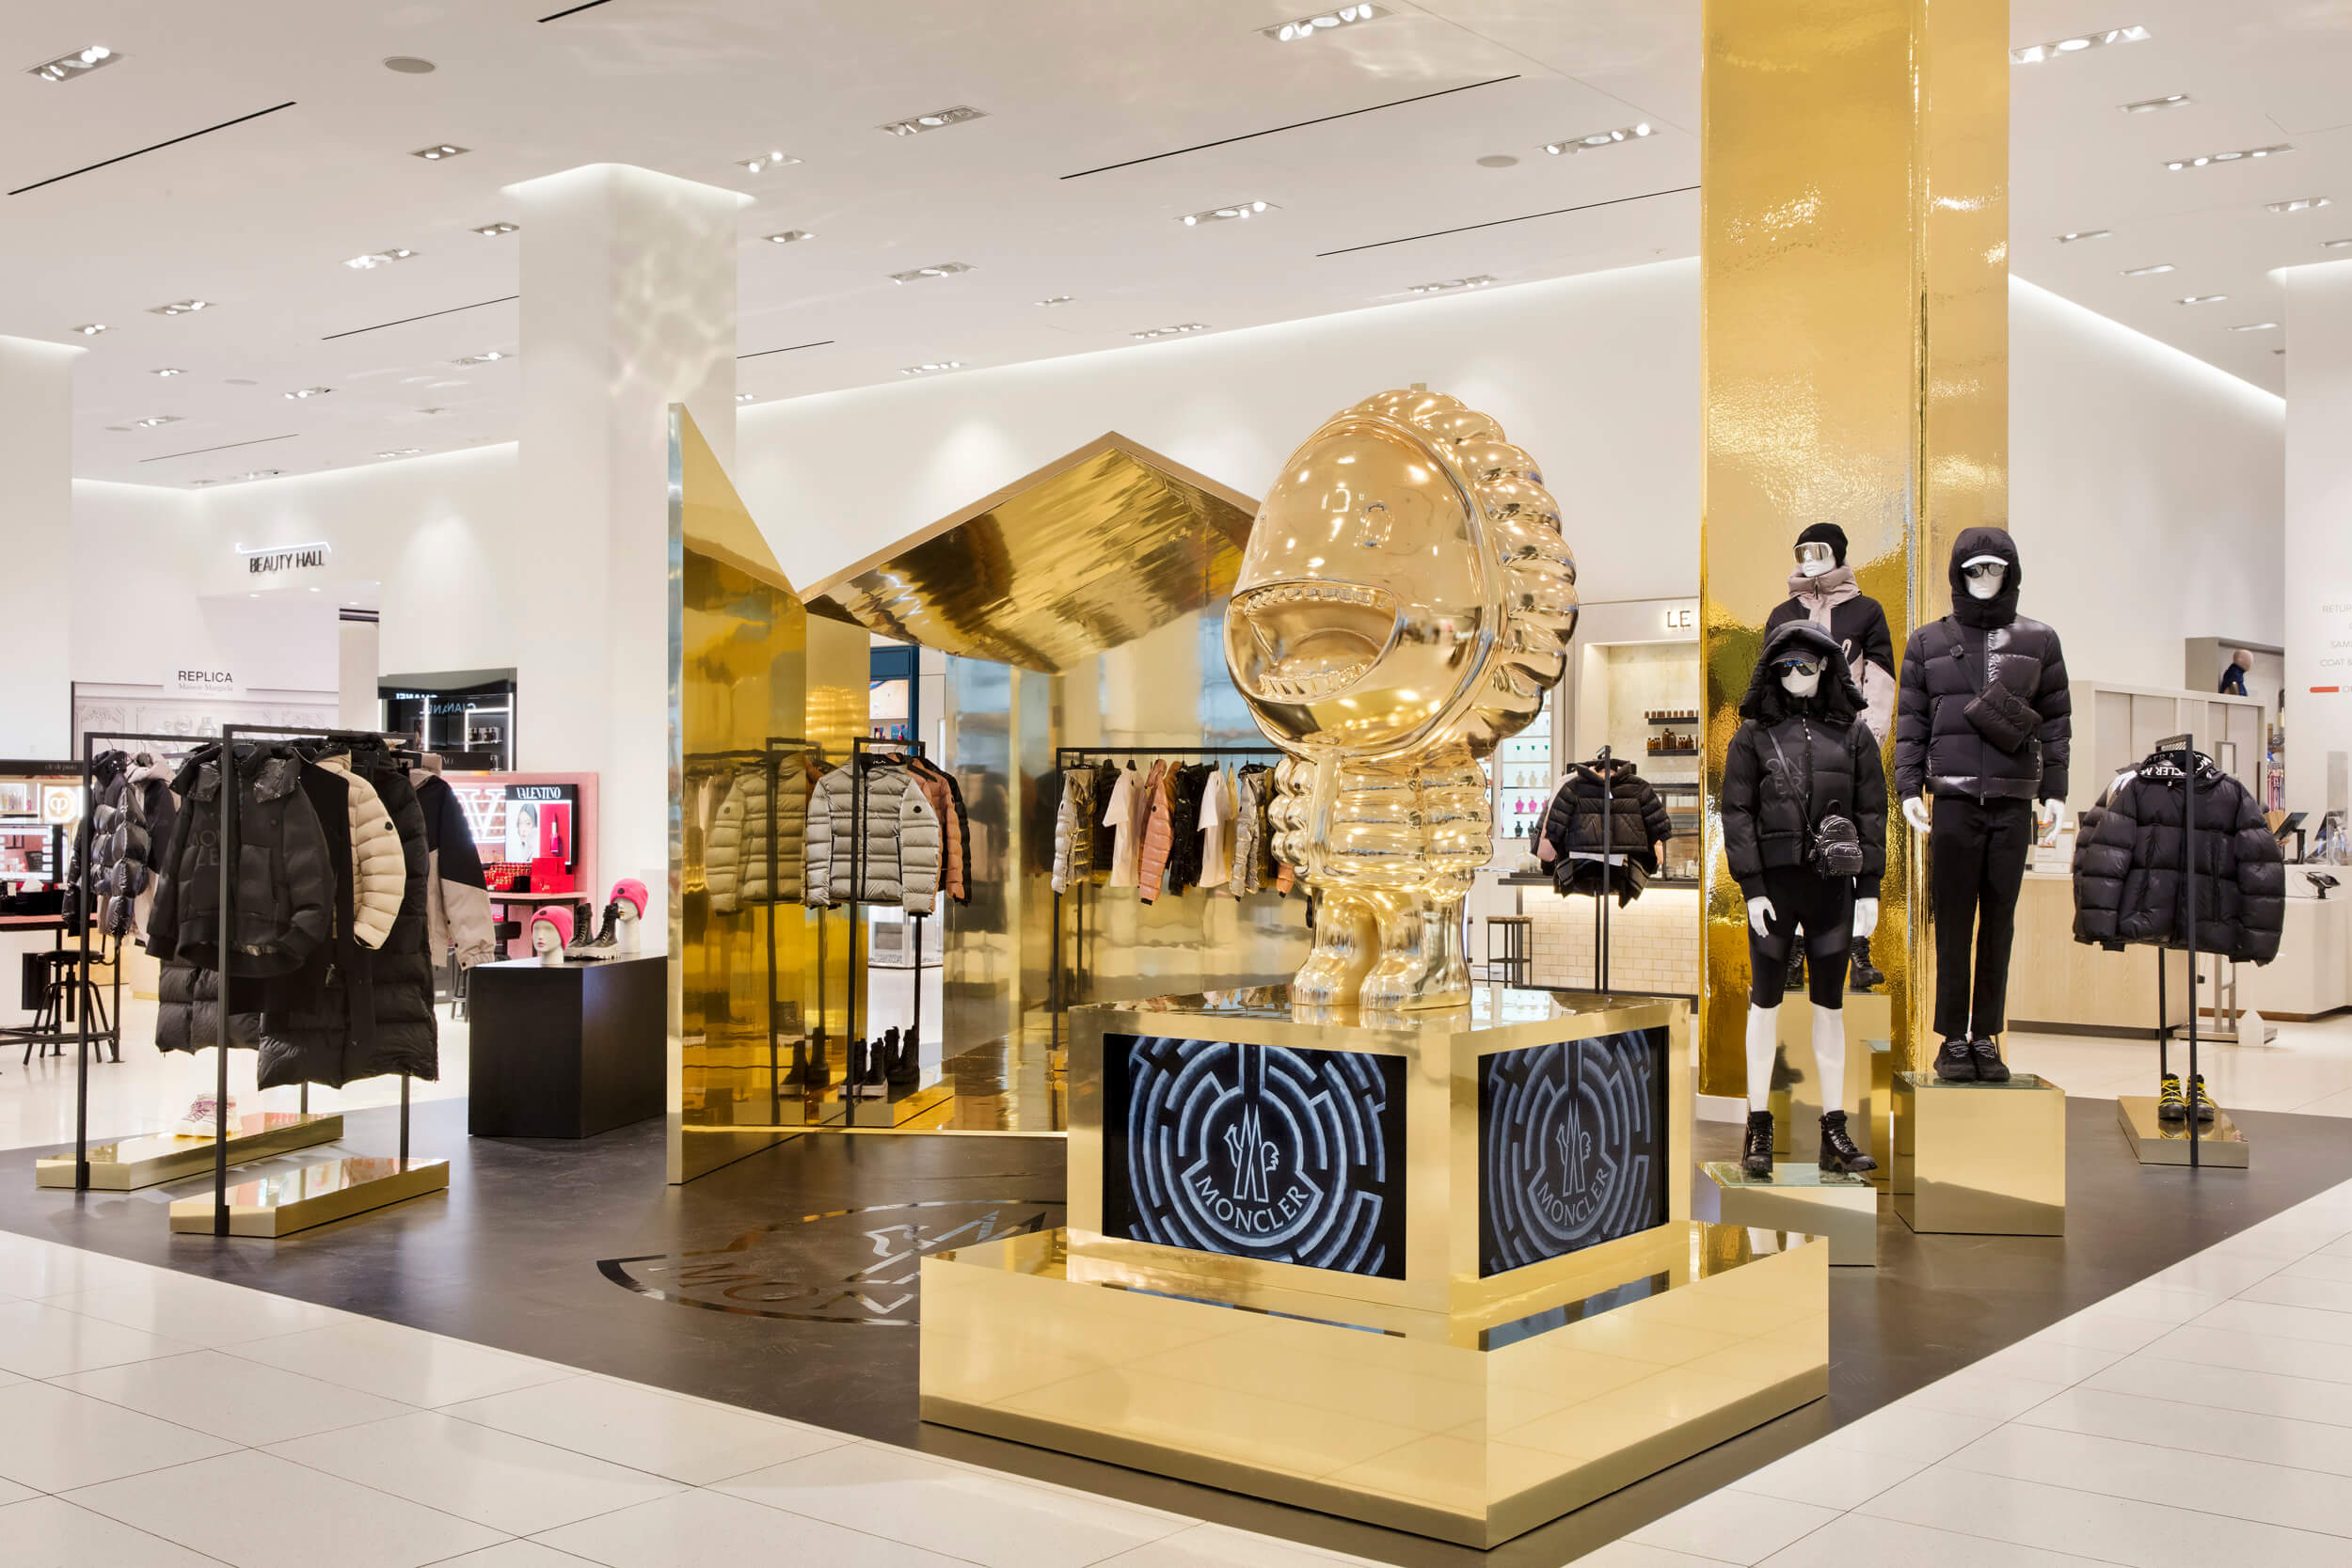 Nordstrom Home Launches First-Ever Home Retail Store Within NYC Flagship